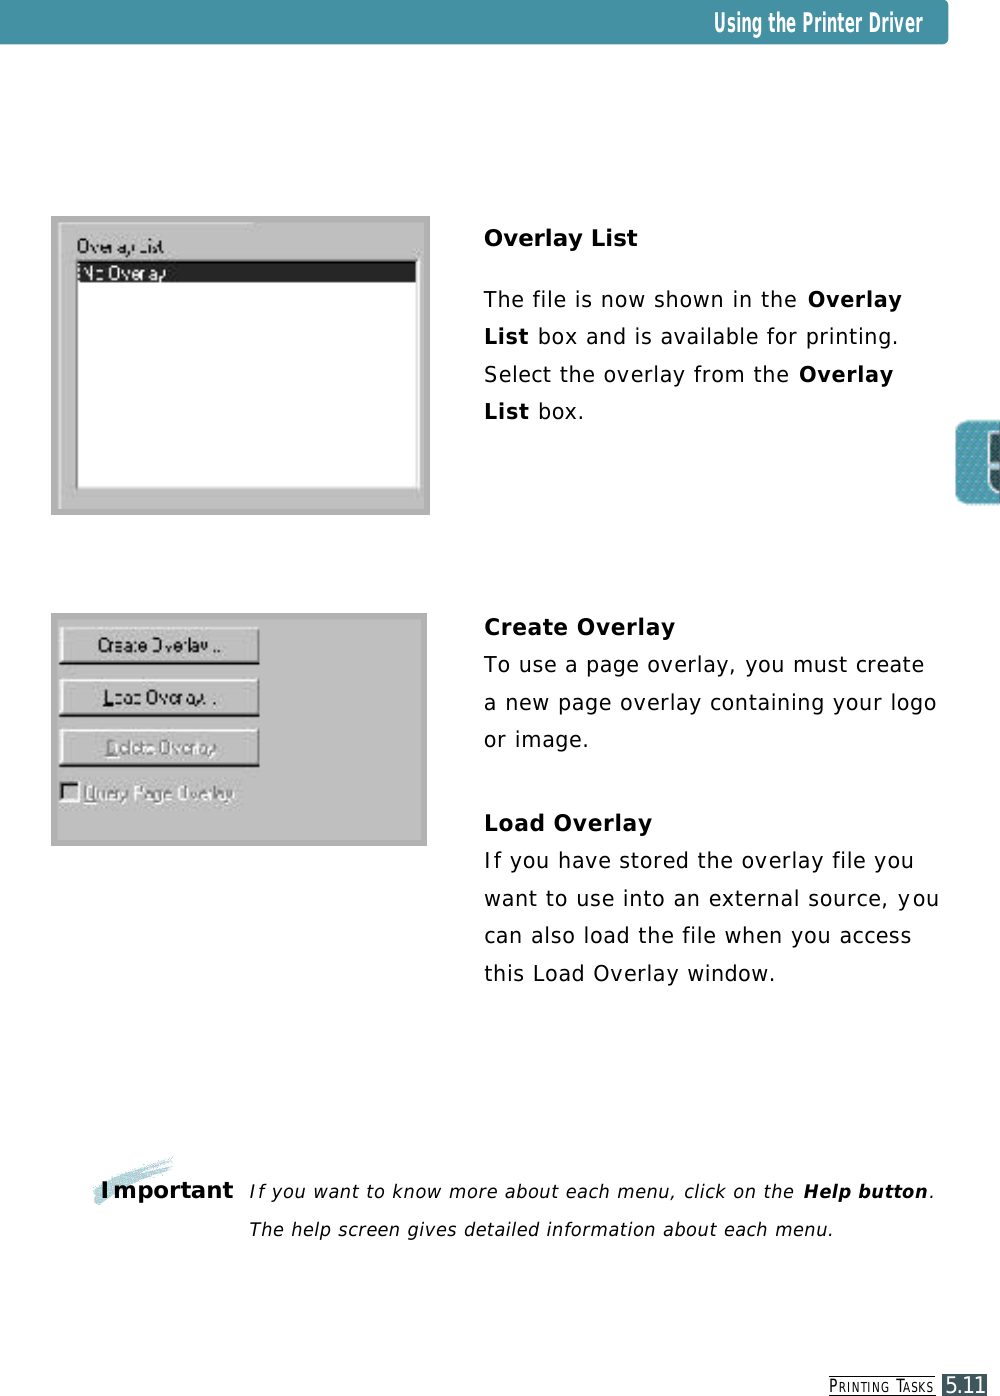 PR I N T I N G TA S K S5.11Overlay ListThe file is now shown in the O v e r l a yList b o x and is available for printing. Select the ove r l ay from the O v e r l a yL i s t b ox .Create OverlayTo use a page ove r l a y, you must createa new page ove r l a y containing your logoor image.Load OverlayIf you have stored the ove r l ay file yo uwant to use into an external source, yo ucan also load the file when you accessthis Load Ove r l a y window.Important If you want to know more about each menu, click on the Help button.The help screen gives detailed information about each menu.Using the Printer Driver